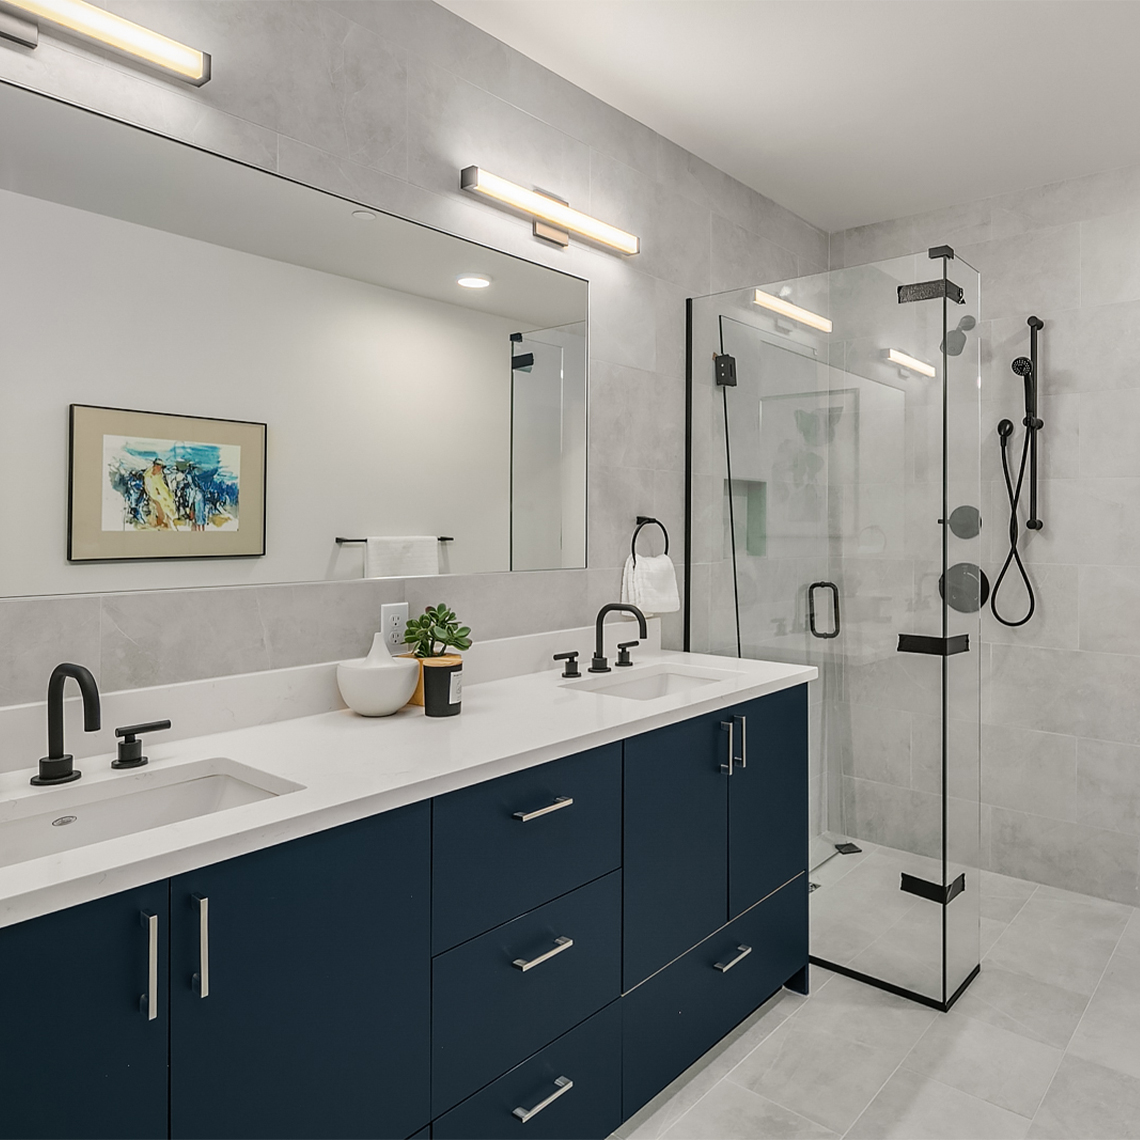 Gamut360's Elements Courtyard townhomes, bathroom